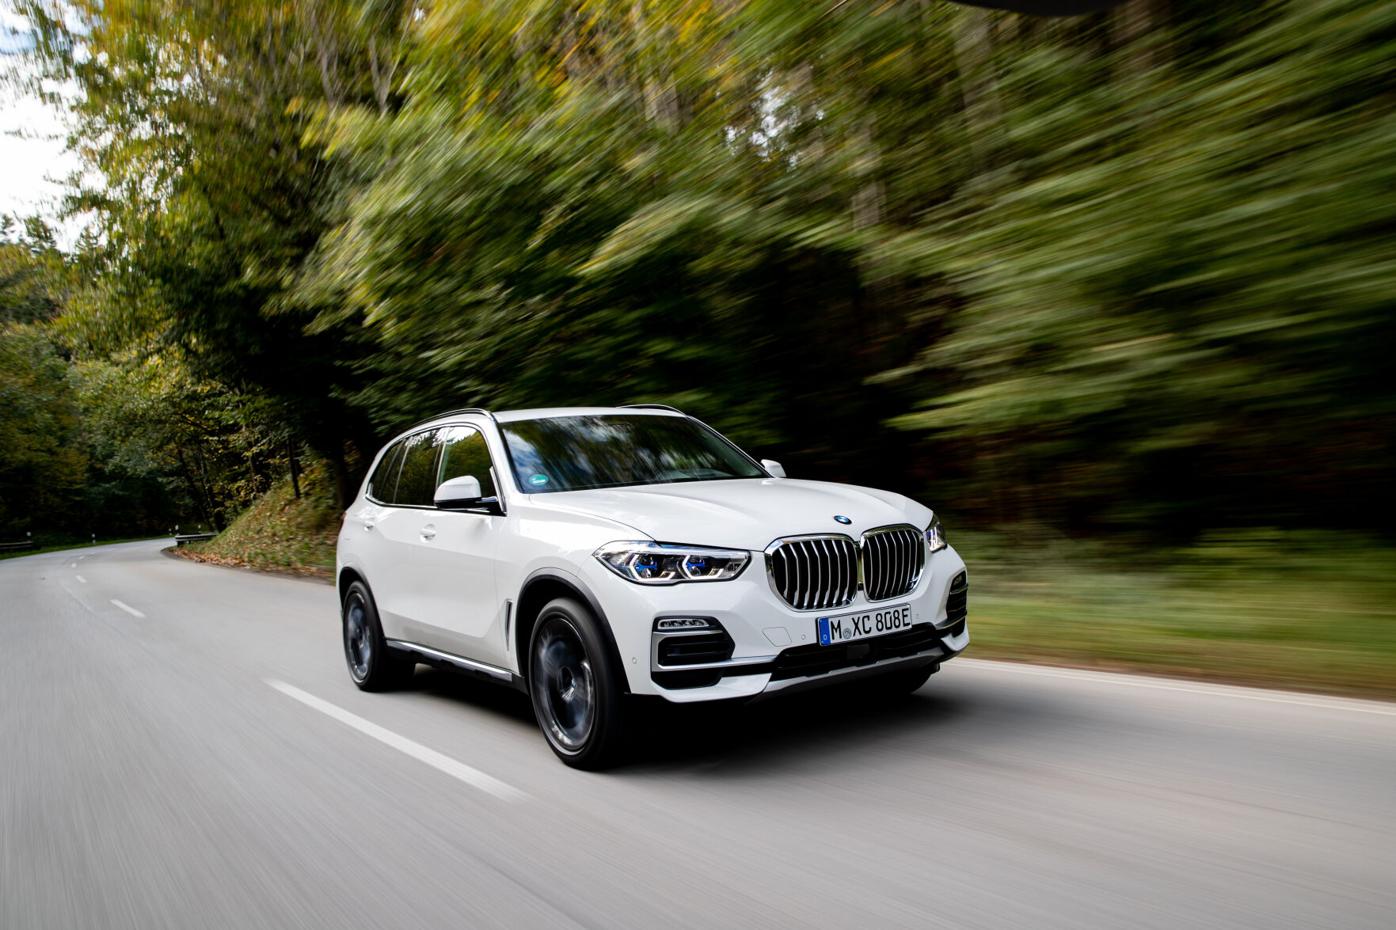 CAR REVIEW: 2021 BMW X5 XDRIVE45E — Second gen X5 plug-in hybrid can please  environmentalists and enthusiasts, News